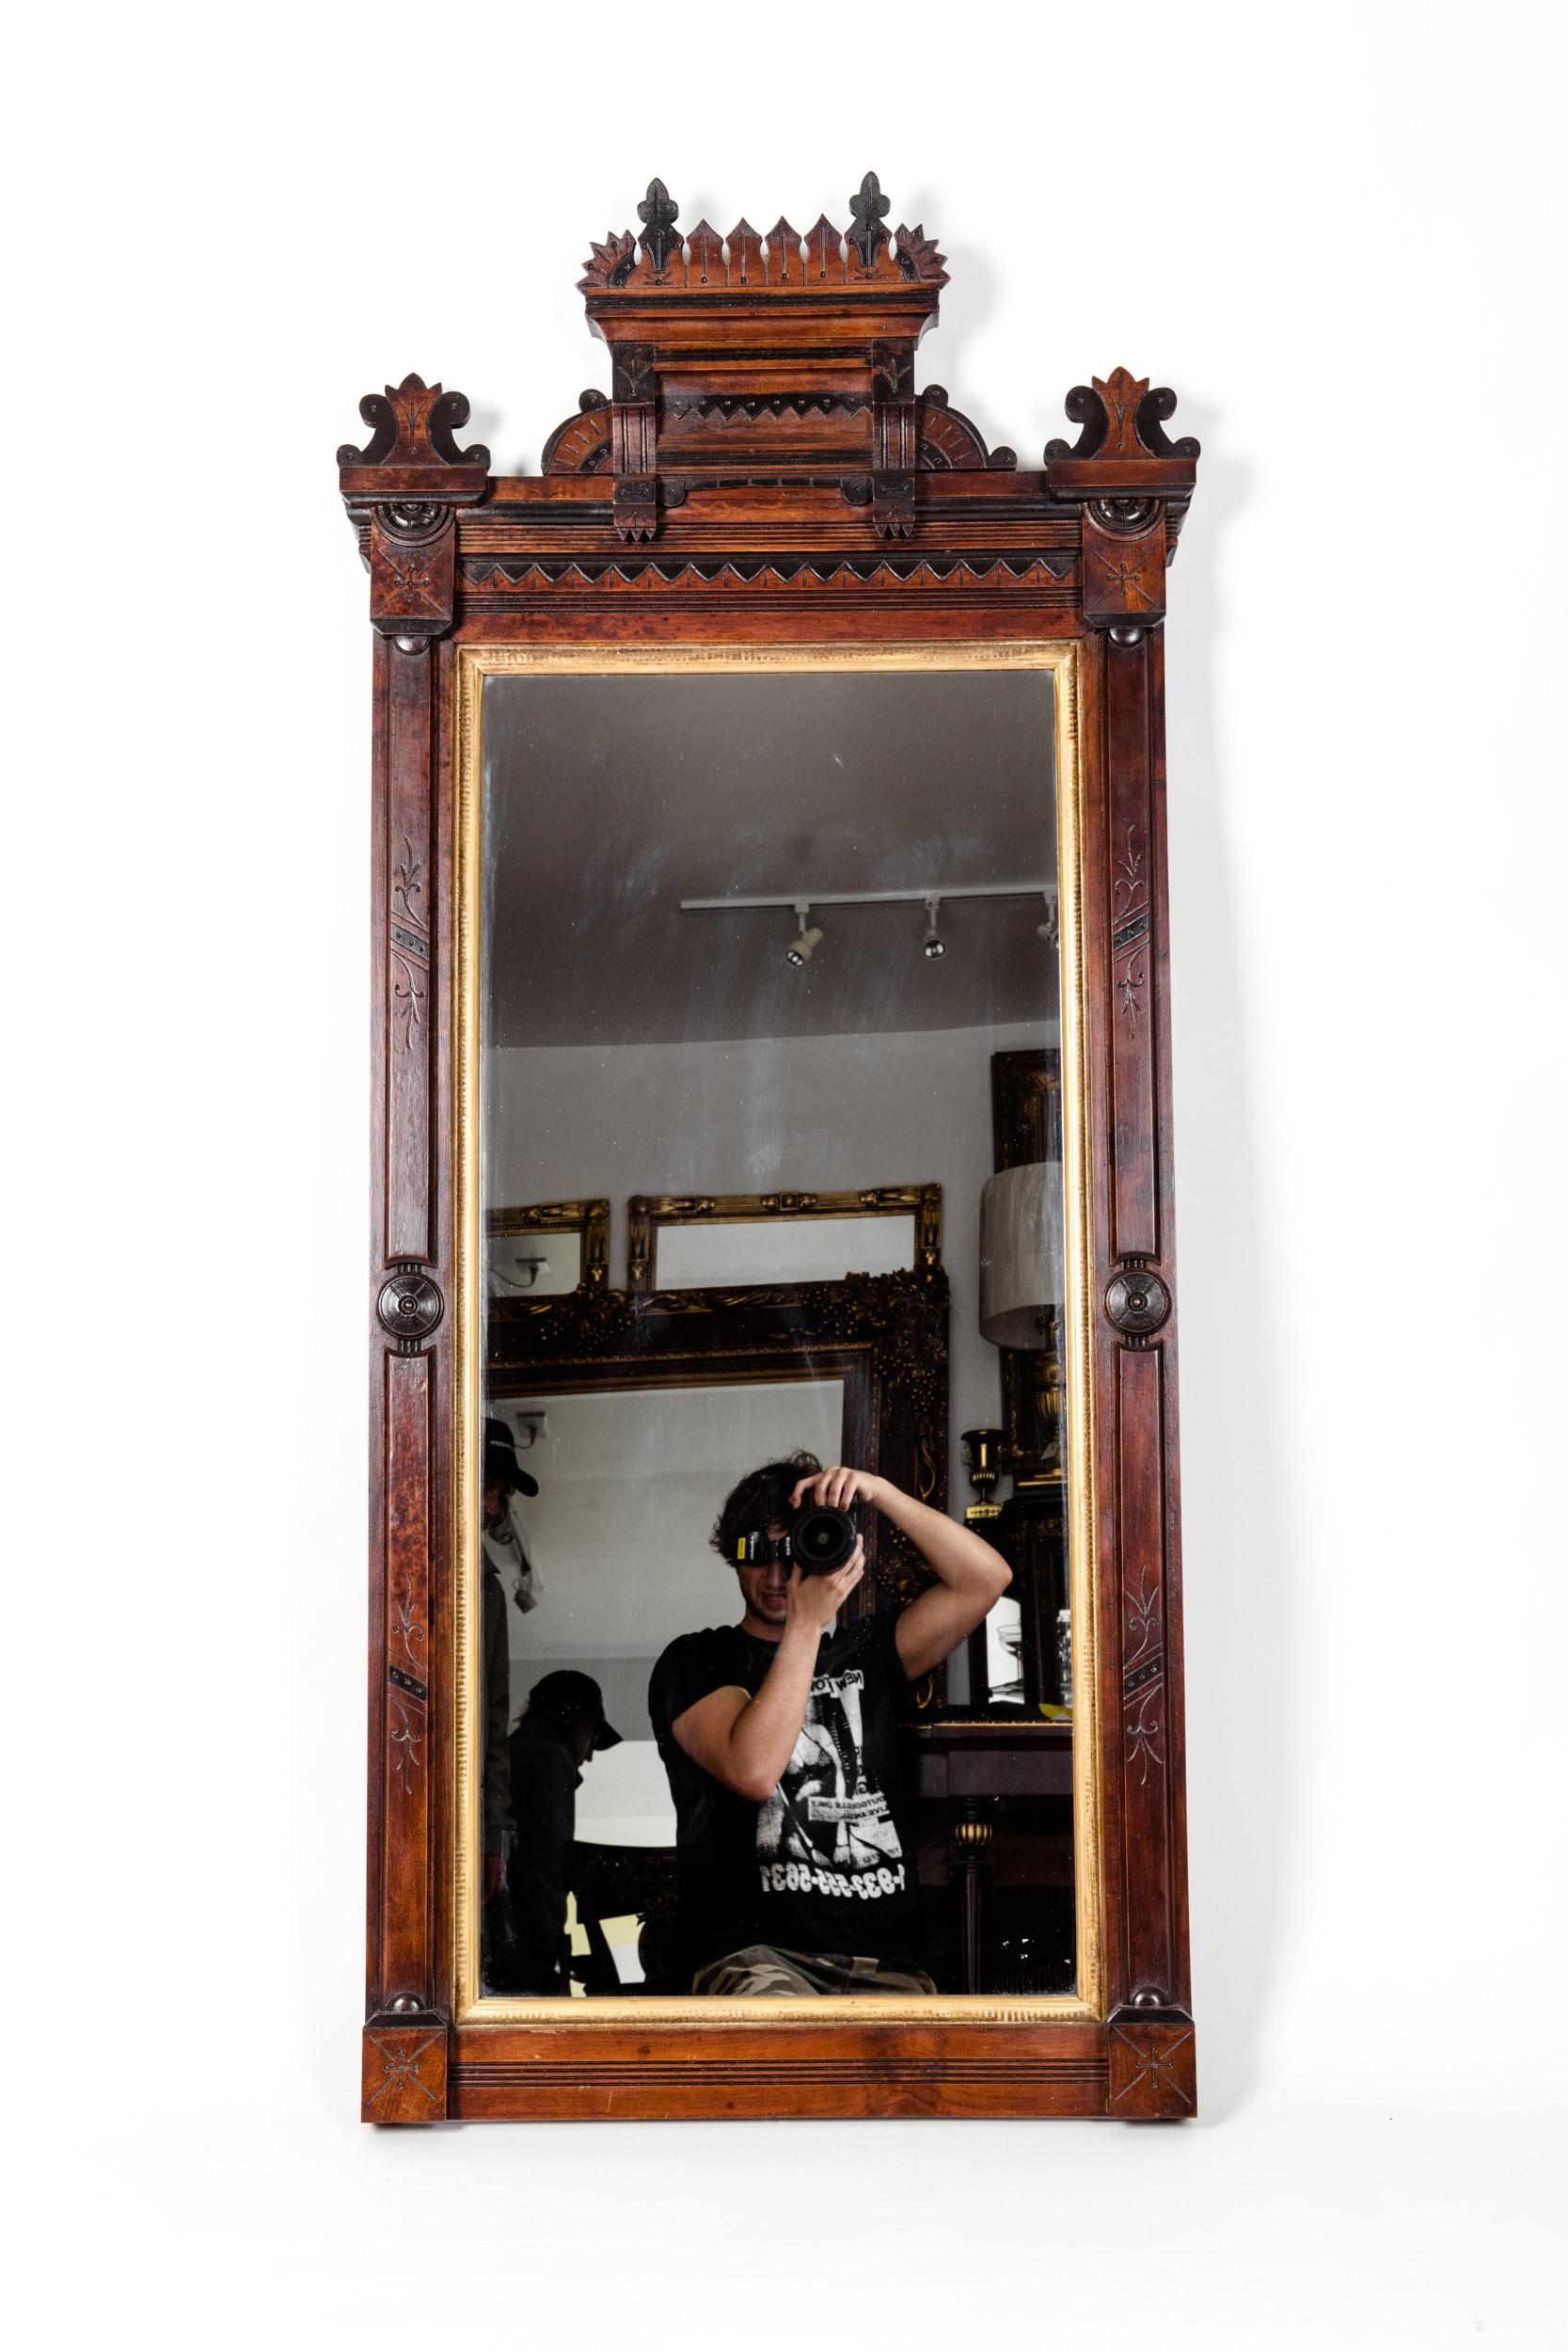 Highly carved mahogany wood framed with gold leaf details Victorian style rectangle hanging wall mirror. Finely carved wood arch design top. The mirror is in excellent antique condition. Minor wear consistent with age or use. The mirror measure